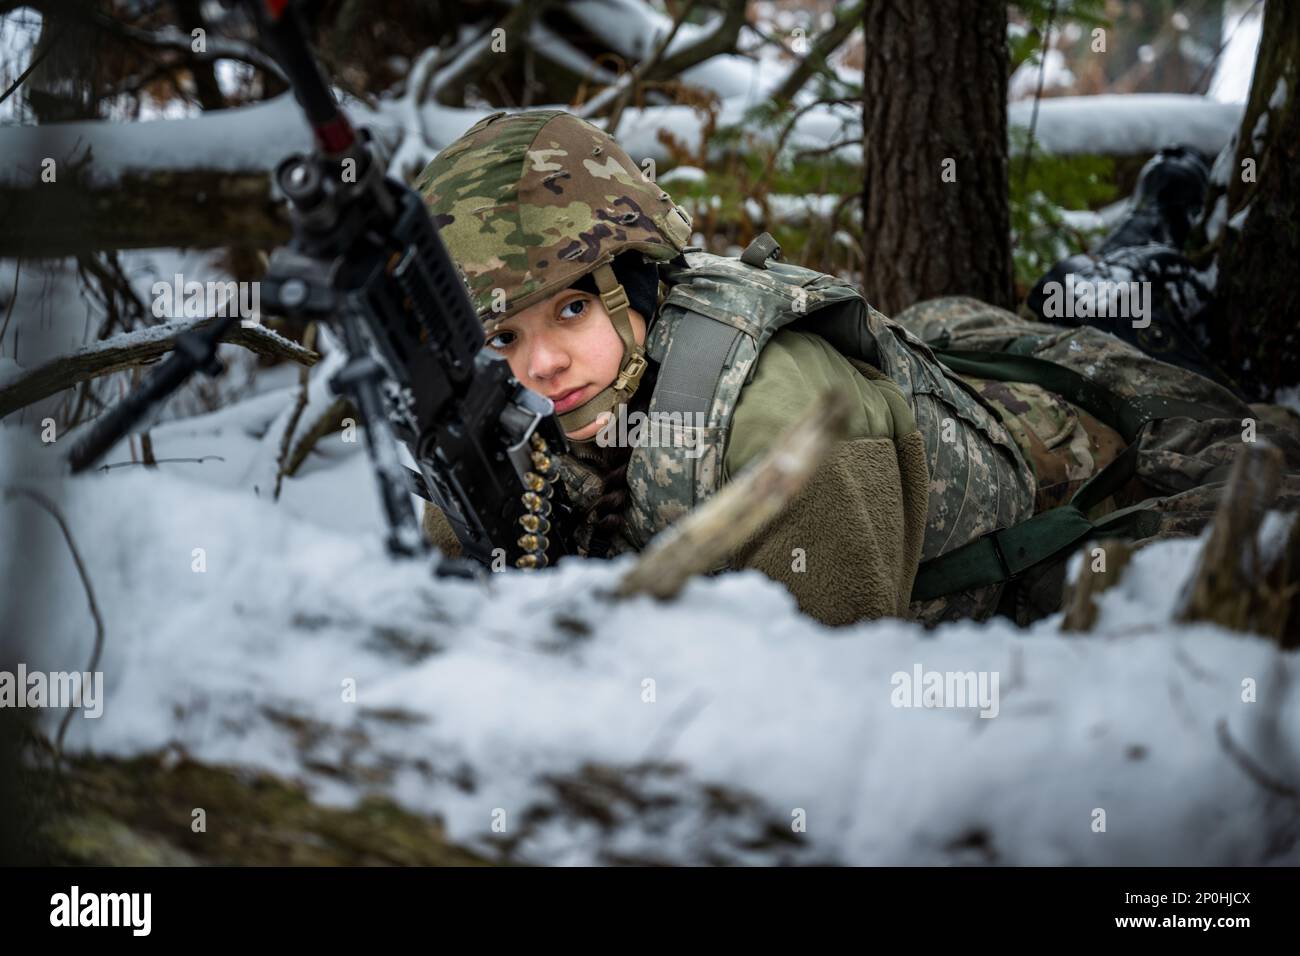 Army Pvt. Ashley Rodriguez, 1-120th Field Artillery Regiment, provides security with the M240 machine gun as the gun team sets up an M119 howitzer during Northern Strike 23-1, Jan. 25, 2023, at Camp Grayling, Mich. Units that participate in Northern Strike’s winter iteration build readiness by conducting joint, cold-weather training designed to meet objectives of the Department of Defense’s Arctic Strategy. Stock Photo